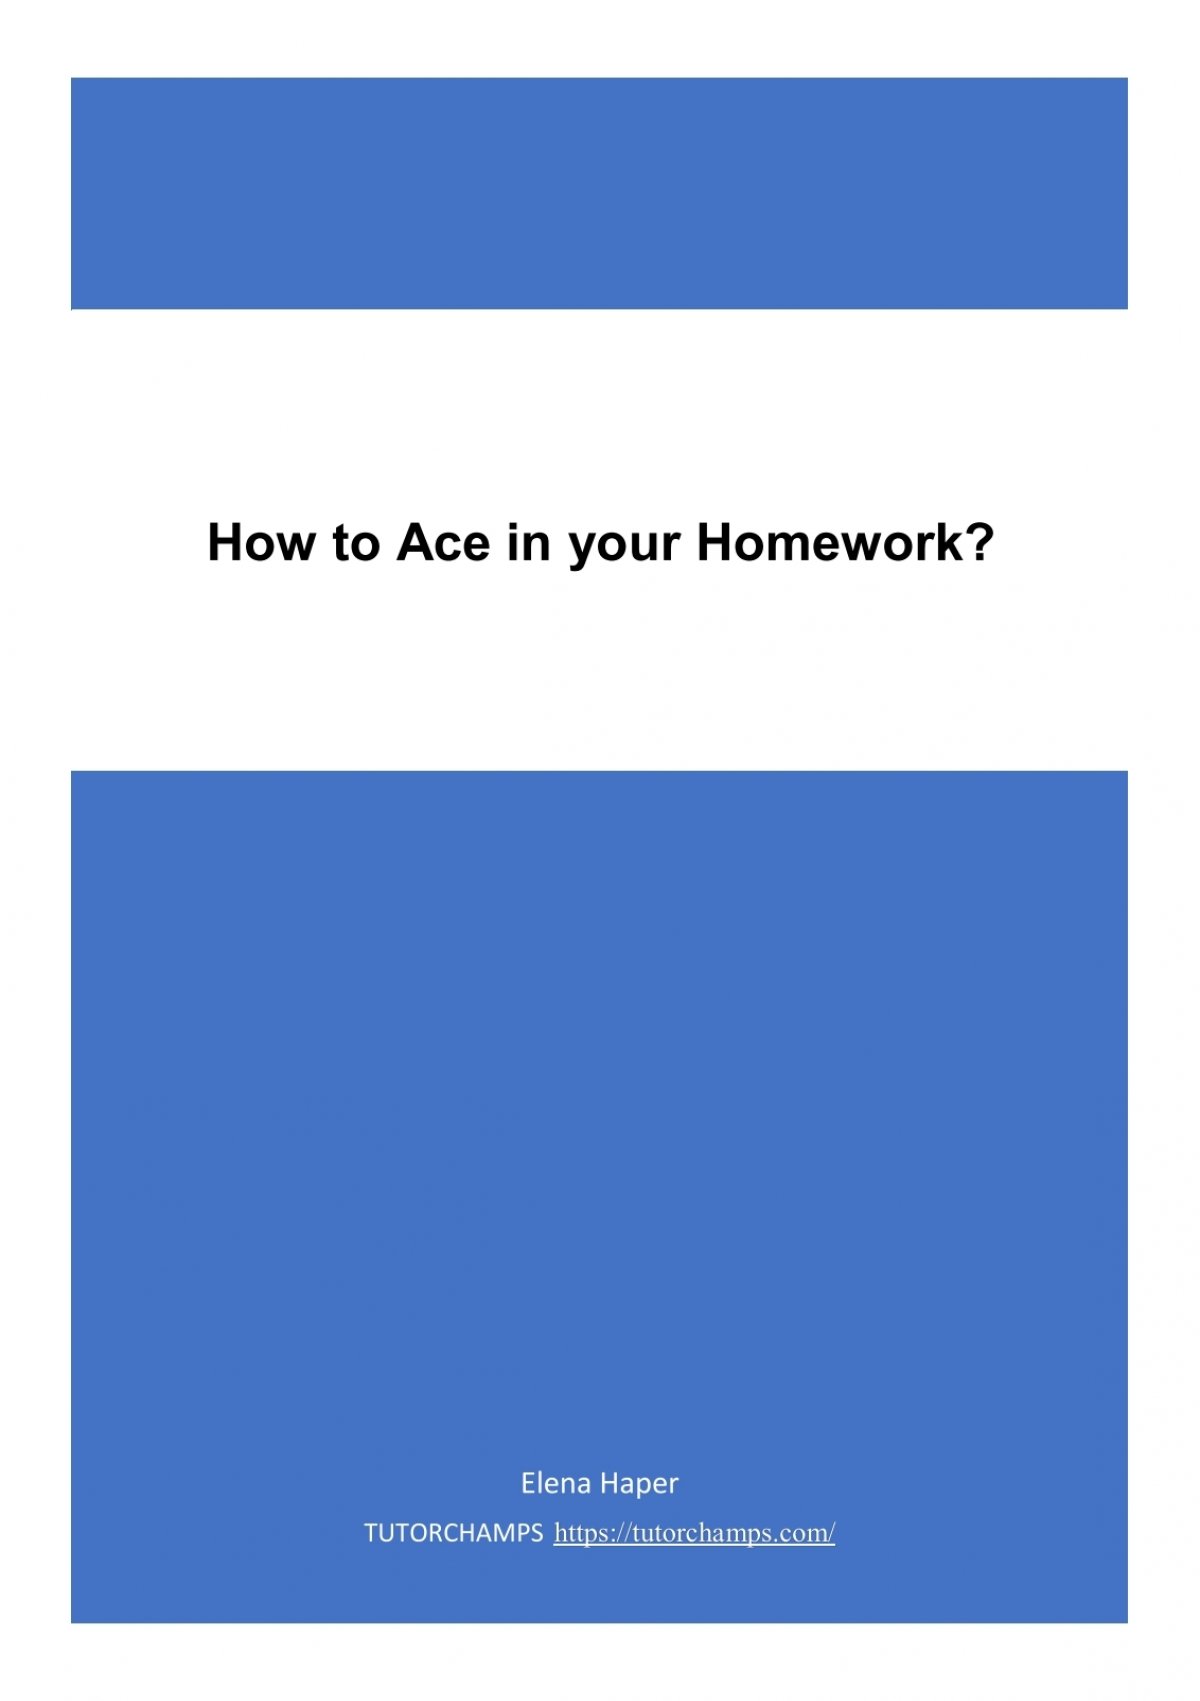 ace homework meaning